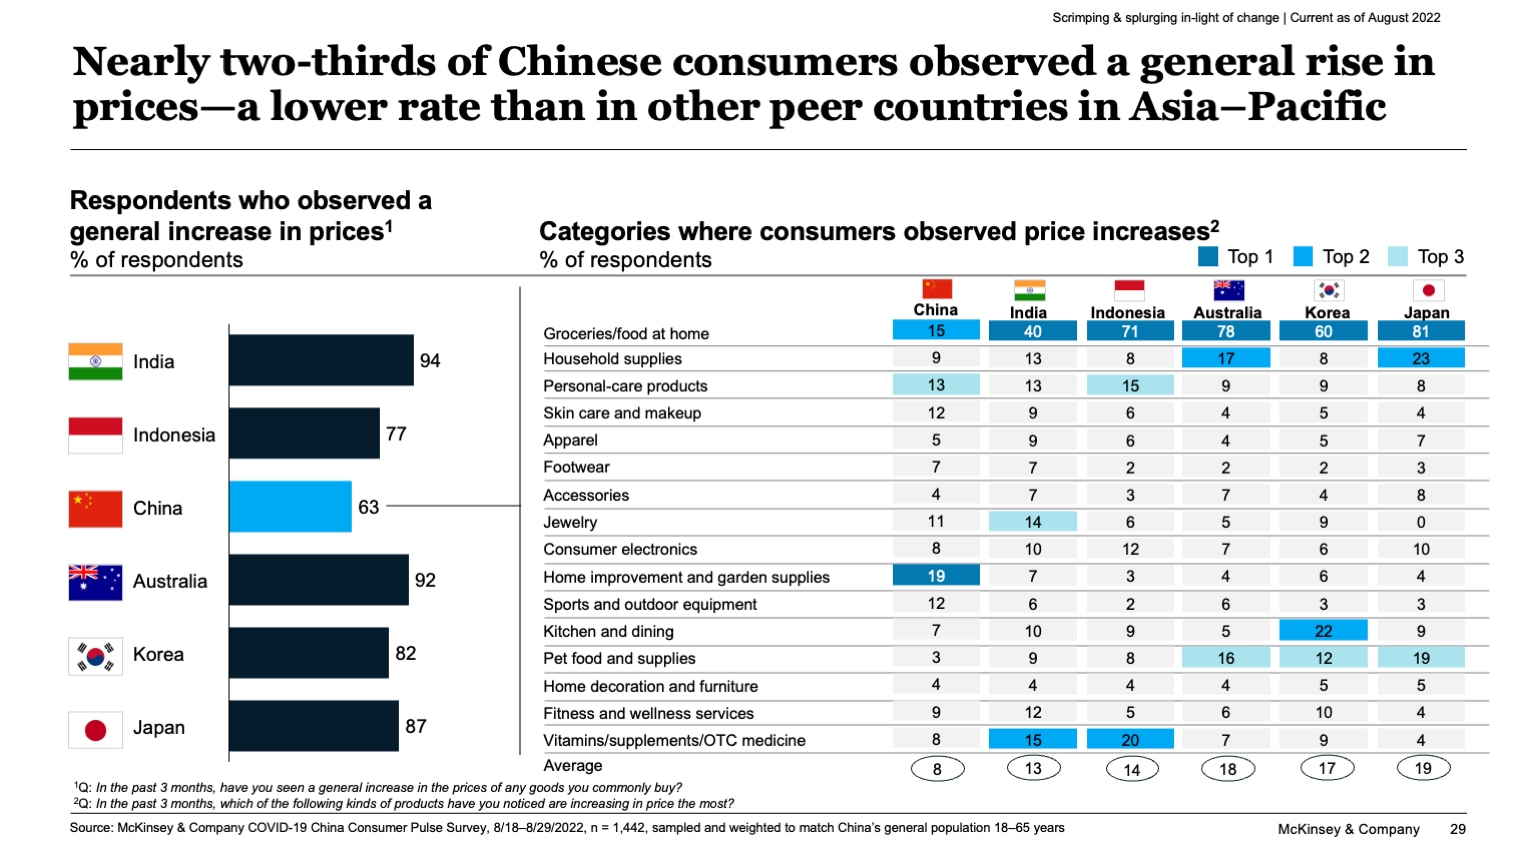 Nearly two-thirds of Chinese consumers observed a general rise in prices--a lower rate than in other peer countries in Asia–Pacific